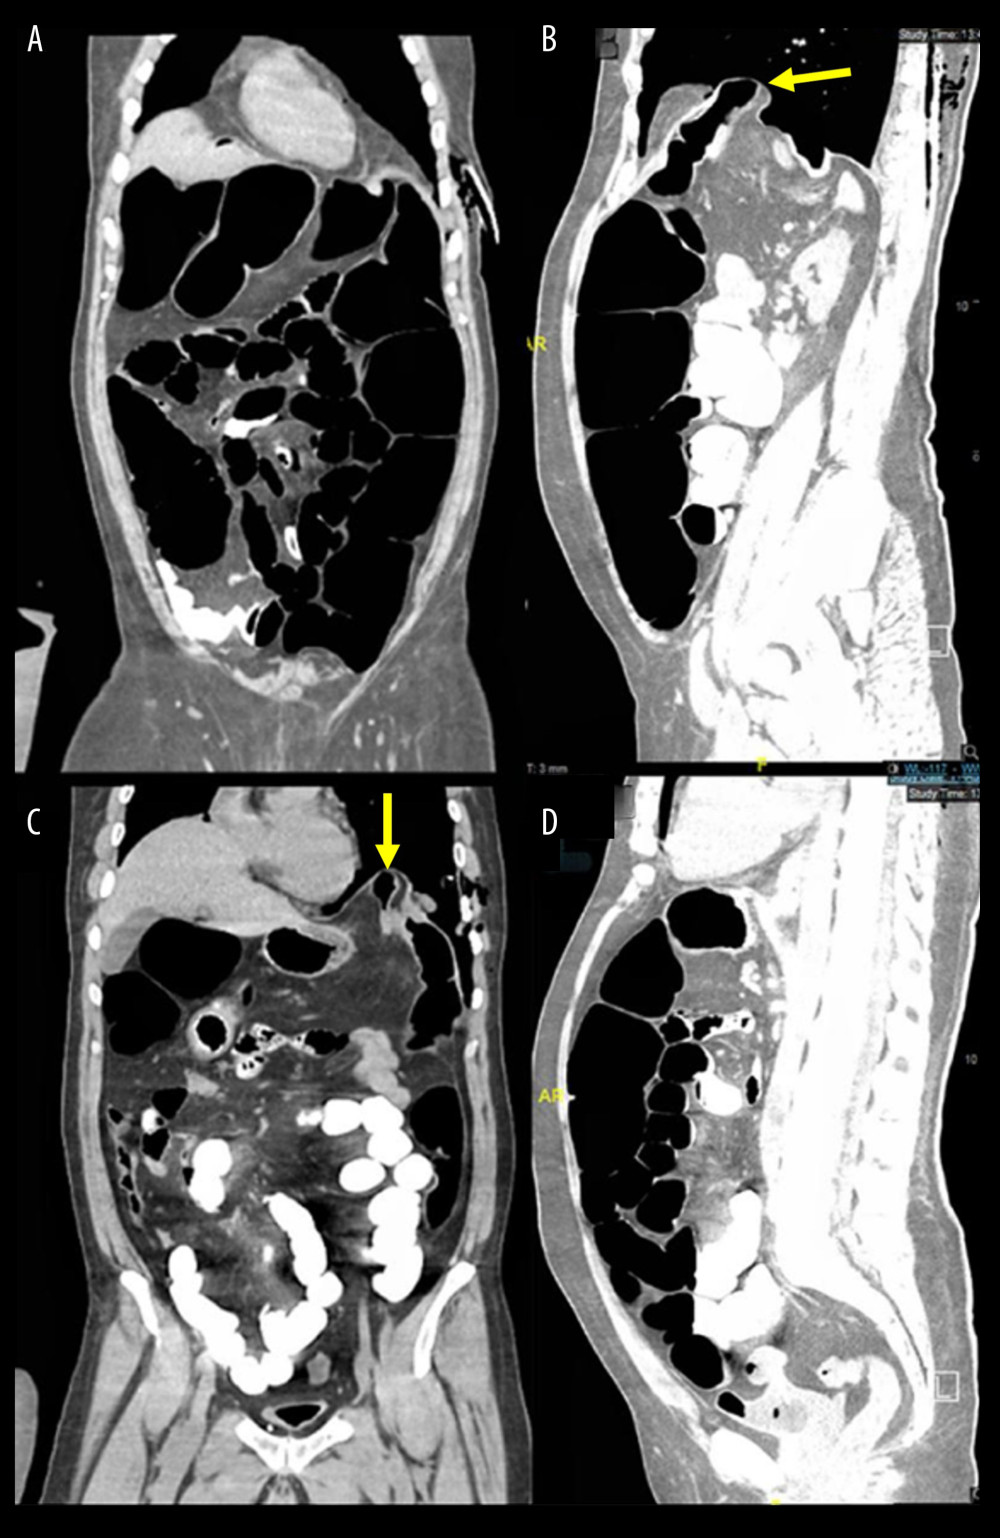 Abdominal computed tomography (CT) scan with contrast sagittal (B, D) and coronal views (A, C) showing dilation of the whole colon with a reduction in the caliber of the splenic flexure, which is interposed in the diaphragm (yellow arrows)